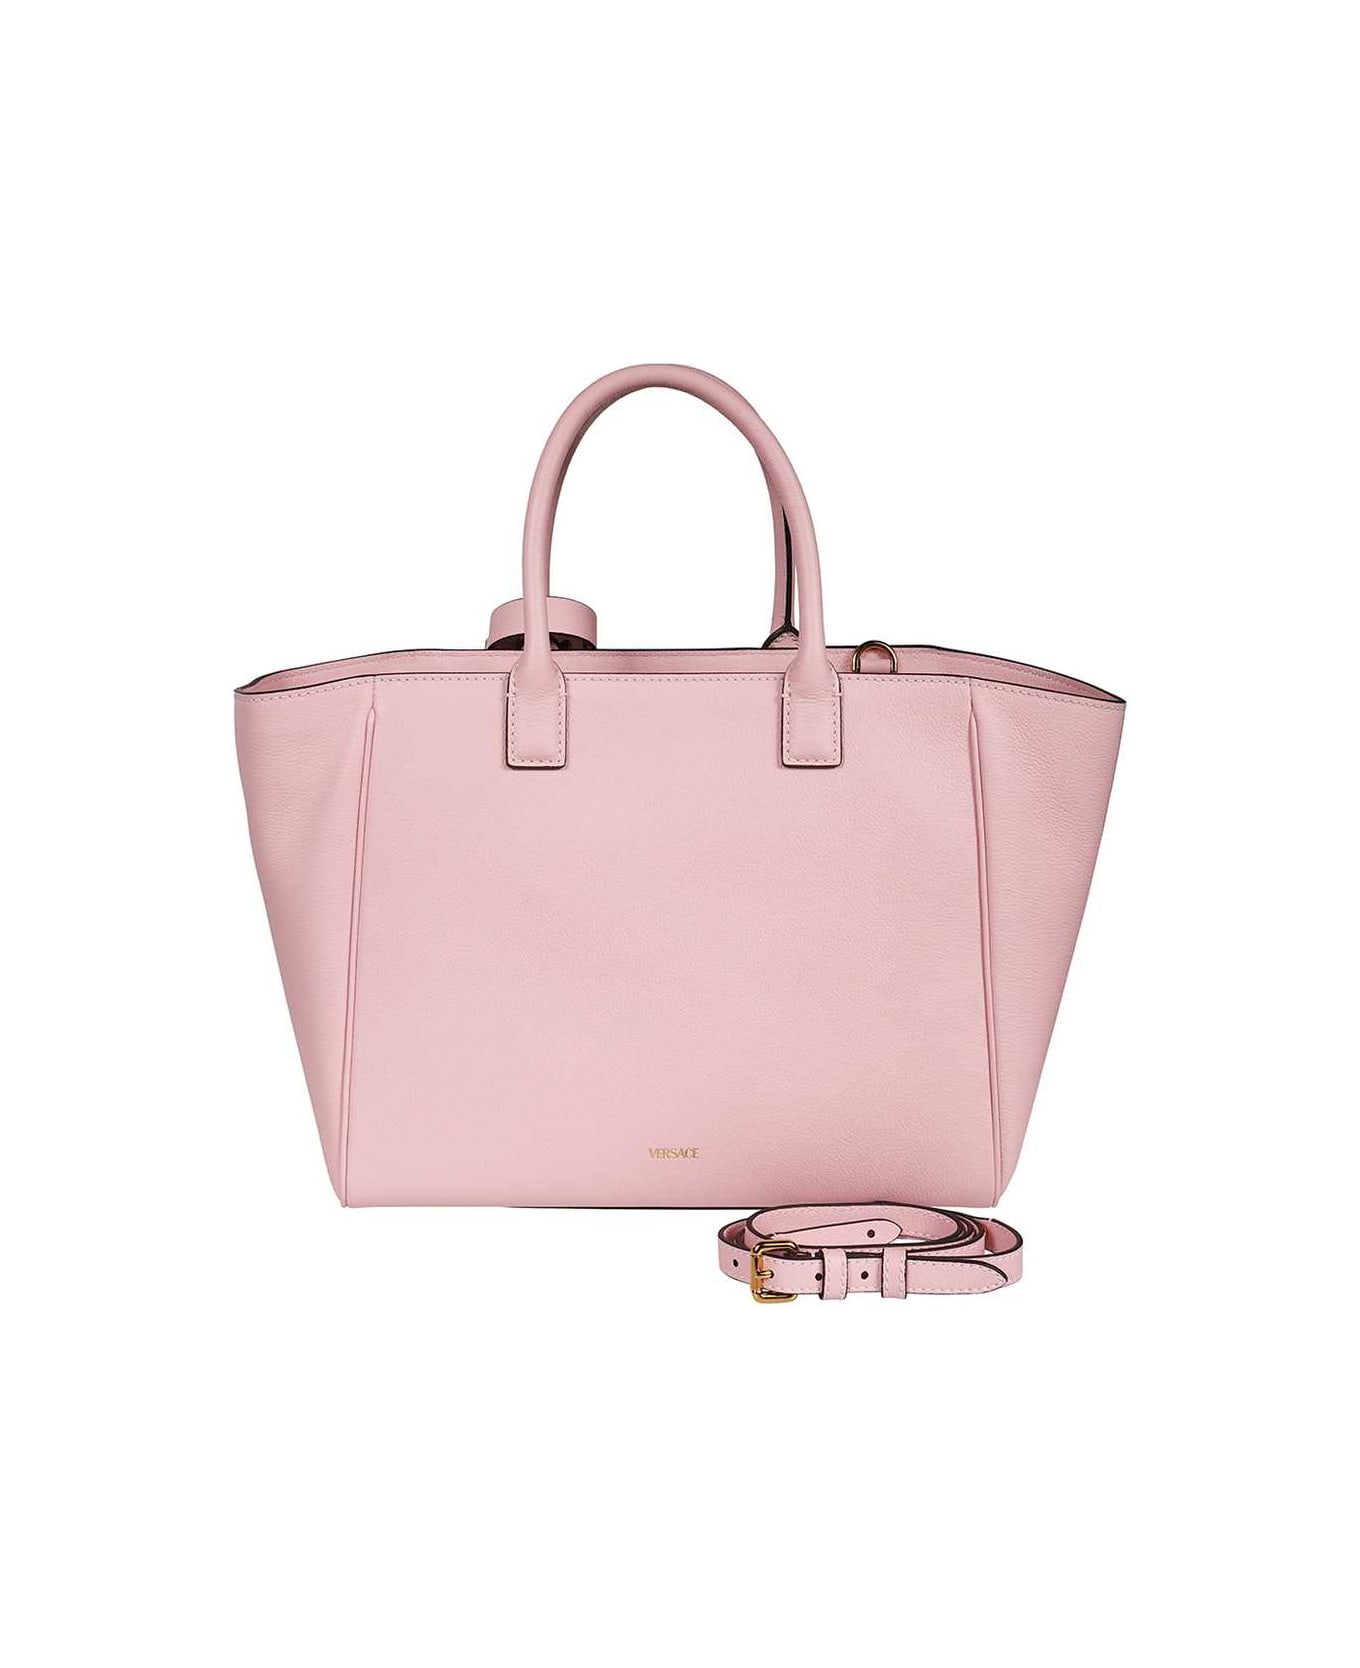 Versace Leather Tote - Pink トートバッグ